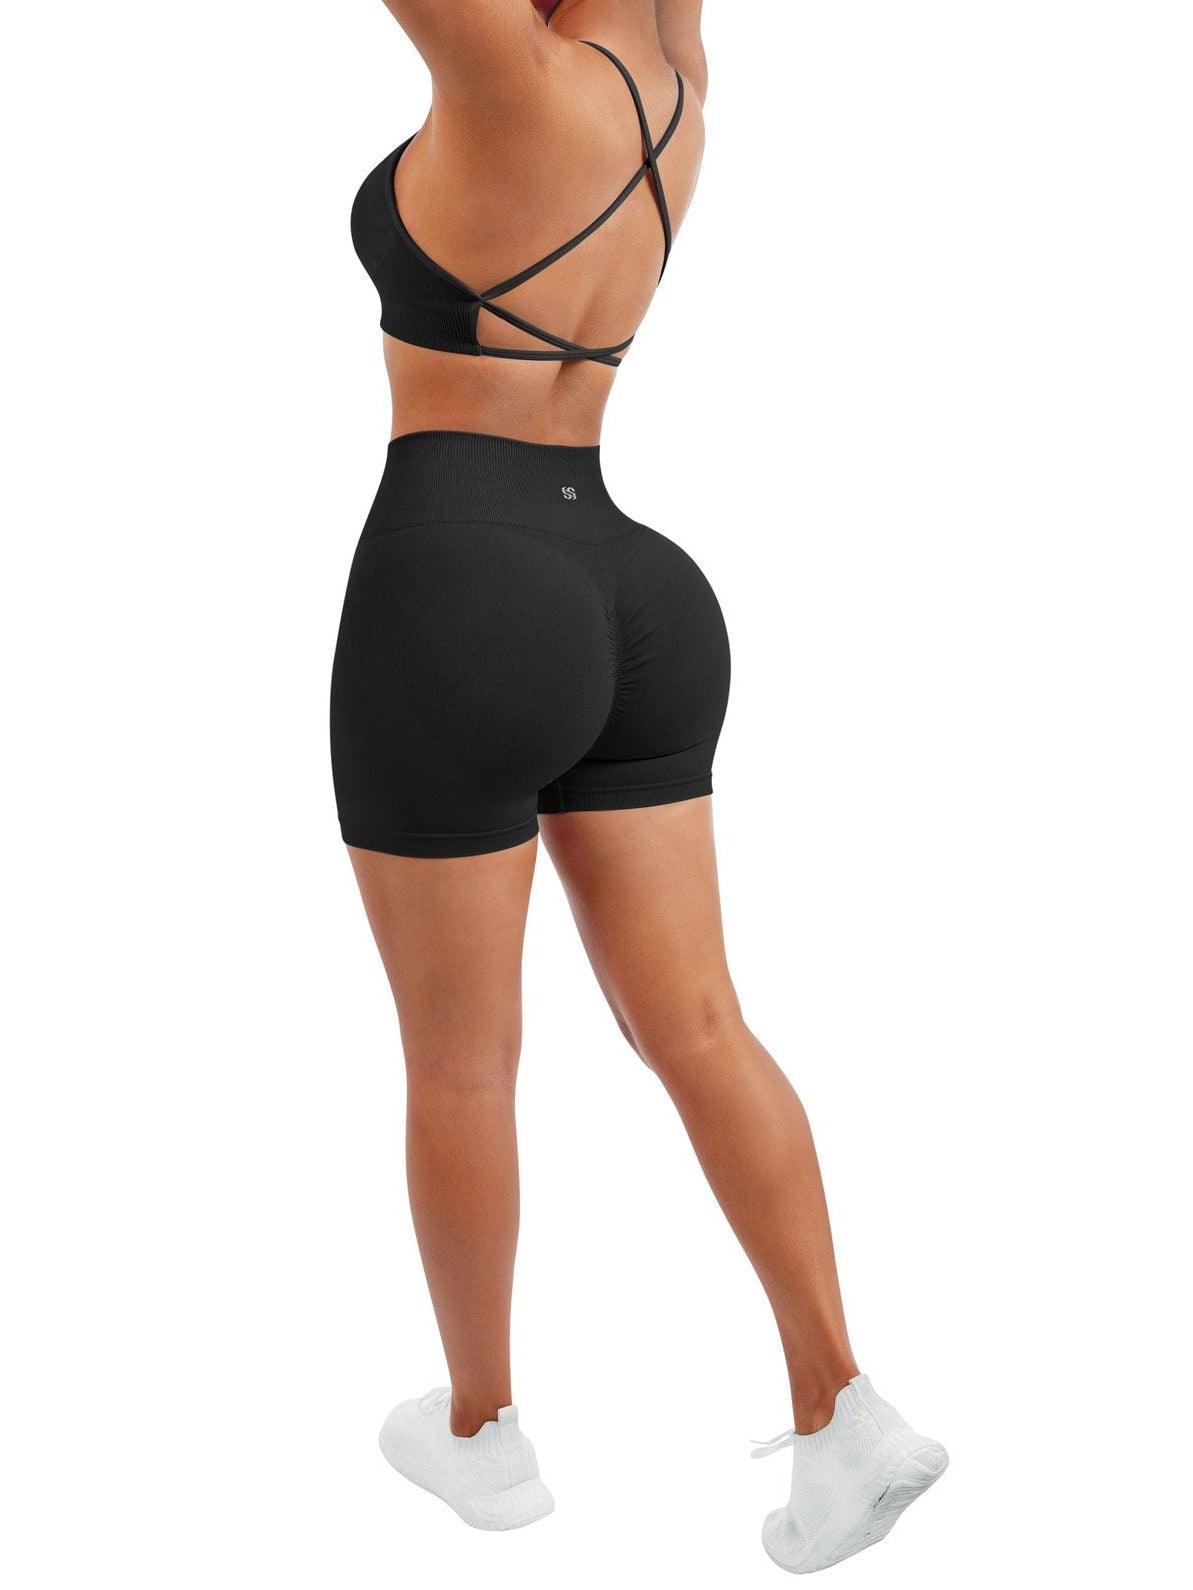  SUUKSESS Women V Cross Seamless Workout Sets Strappy Padded  Sports Bra High Waist Booty Shorts (Black,S) : Clothing, Shoes & Jewelry